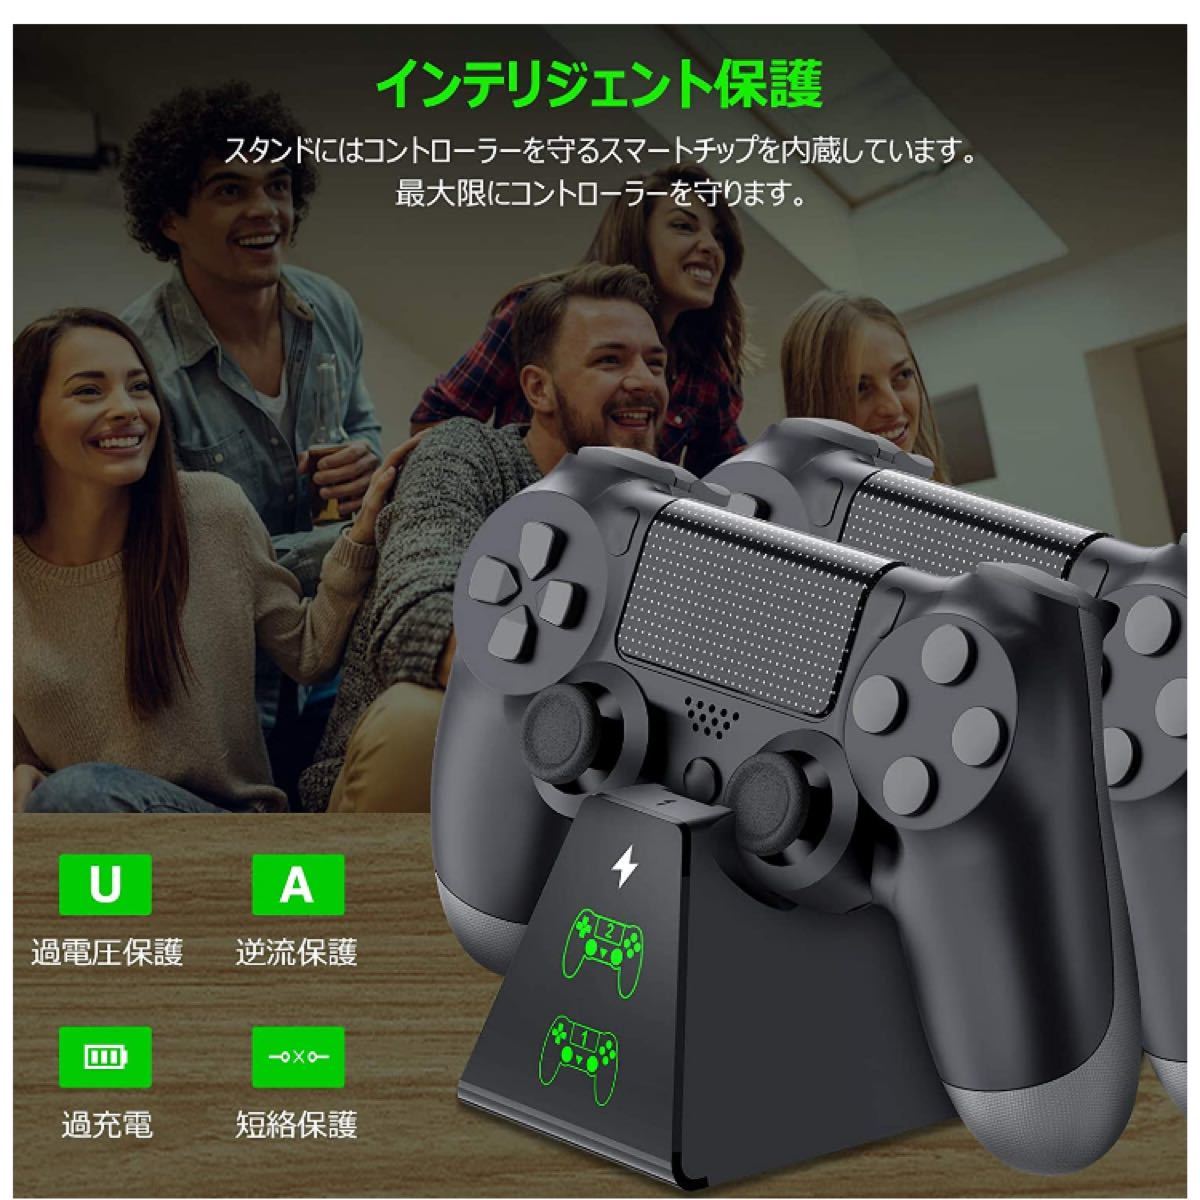 PS4 コントローラー充電器